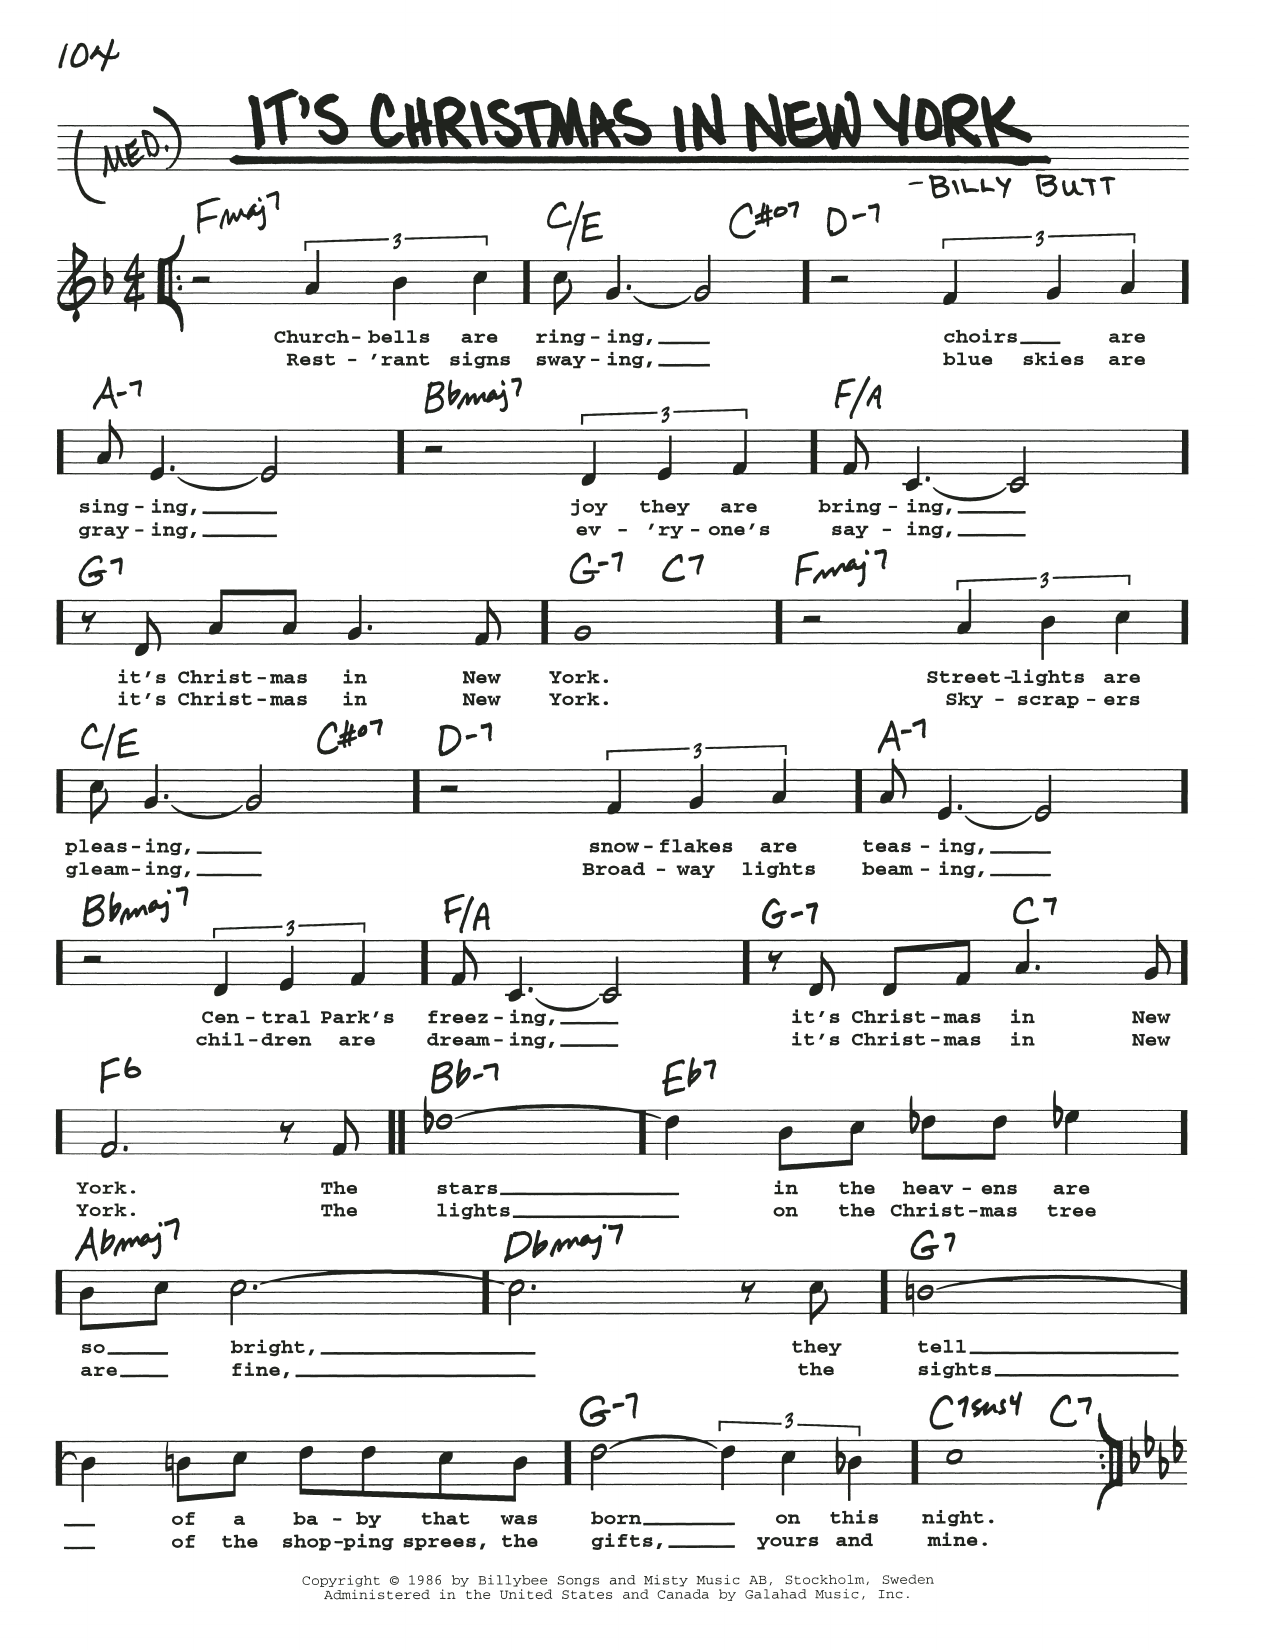 It's Christmas In New York sheet music